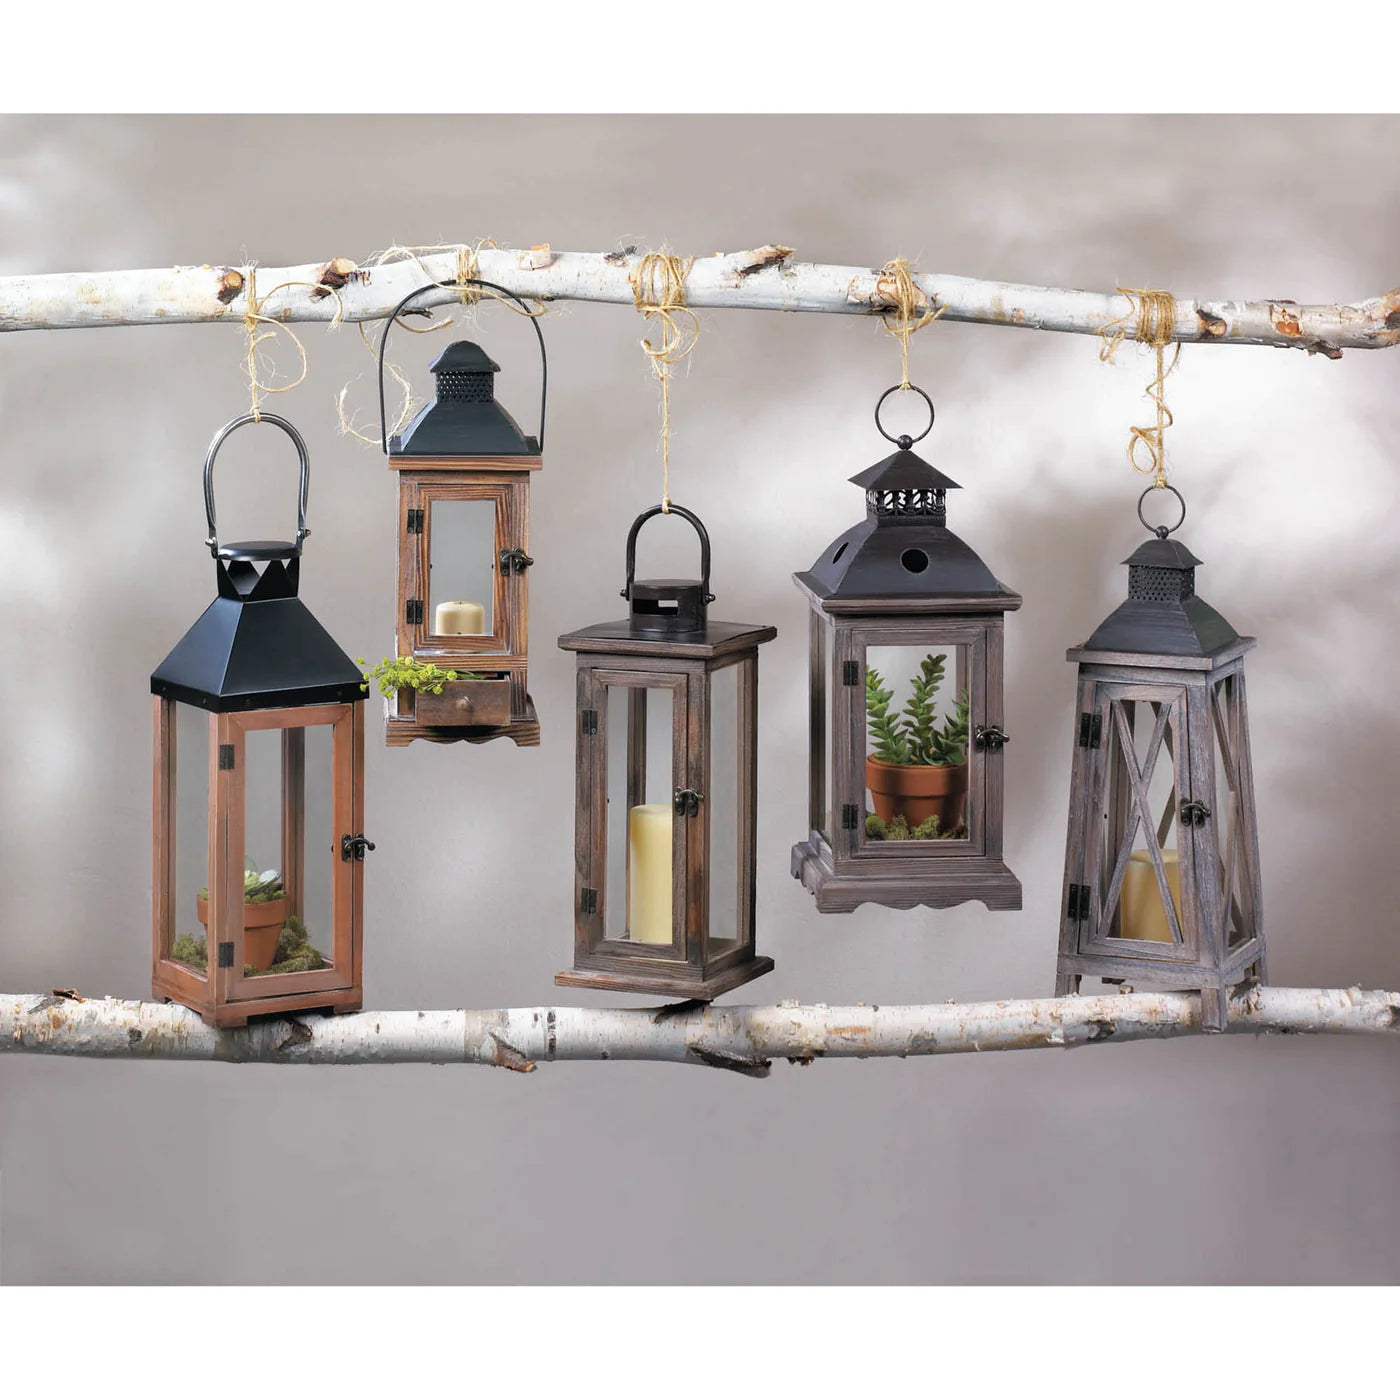 Large Monticello Candle Lantern